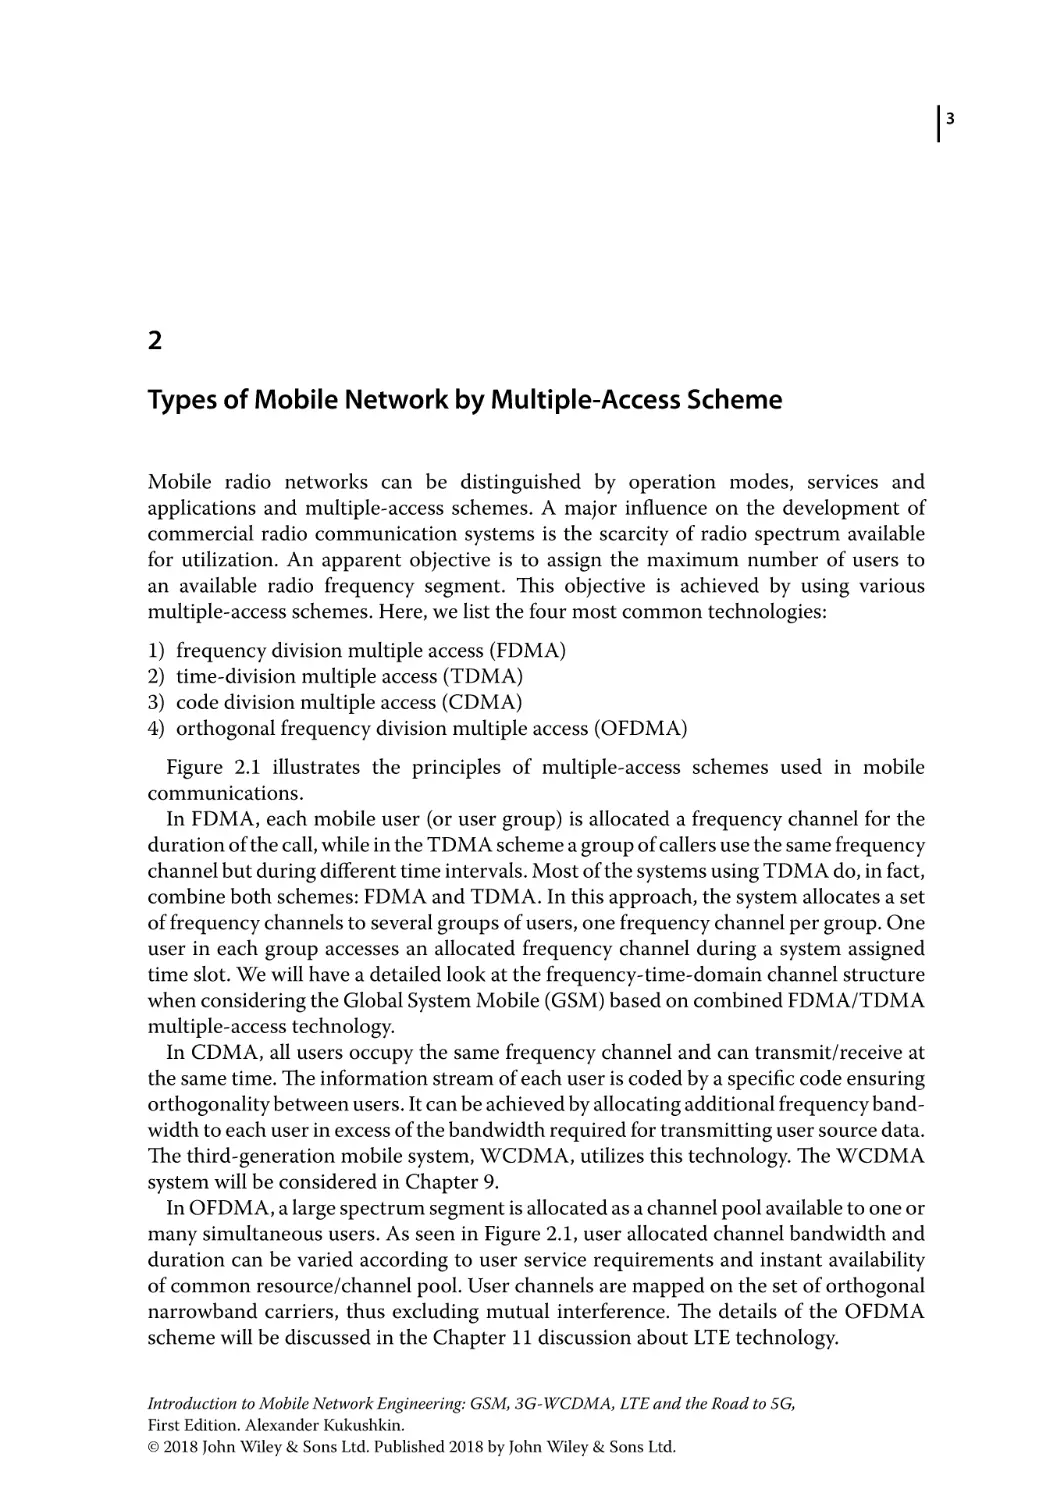 2 Types ofMobile Network by Multiple-Access Scheme